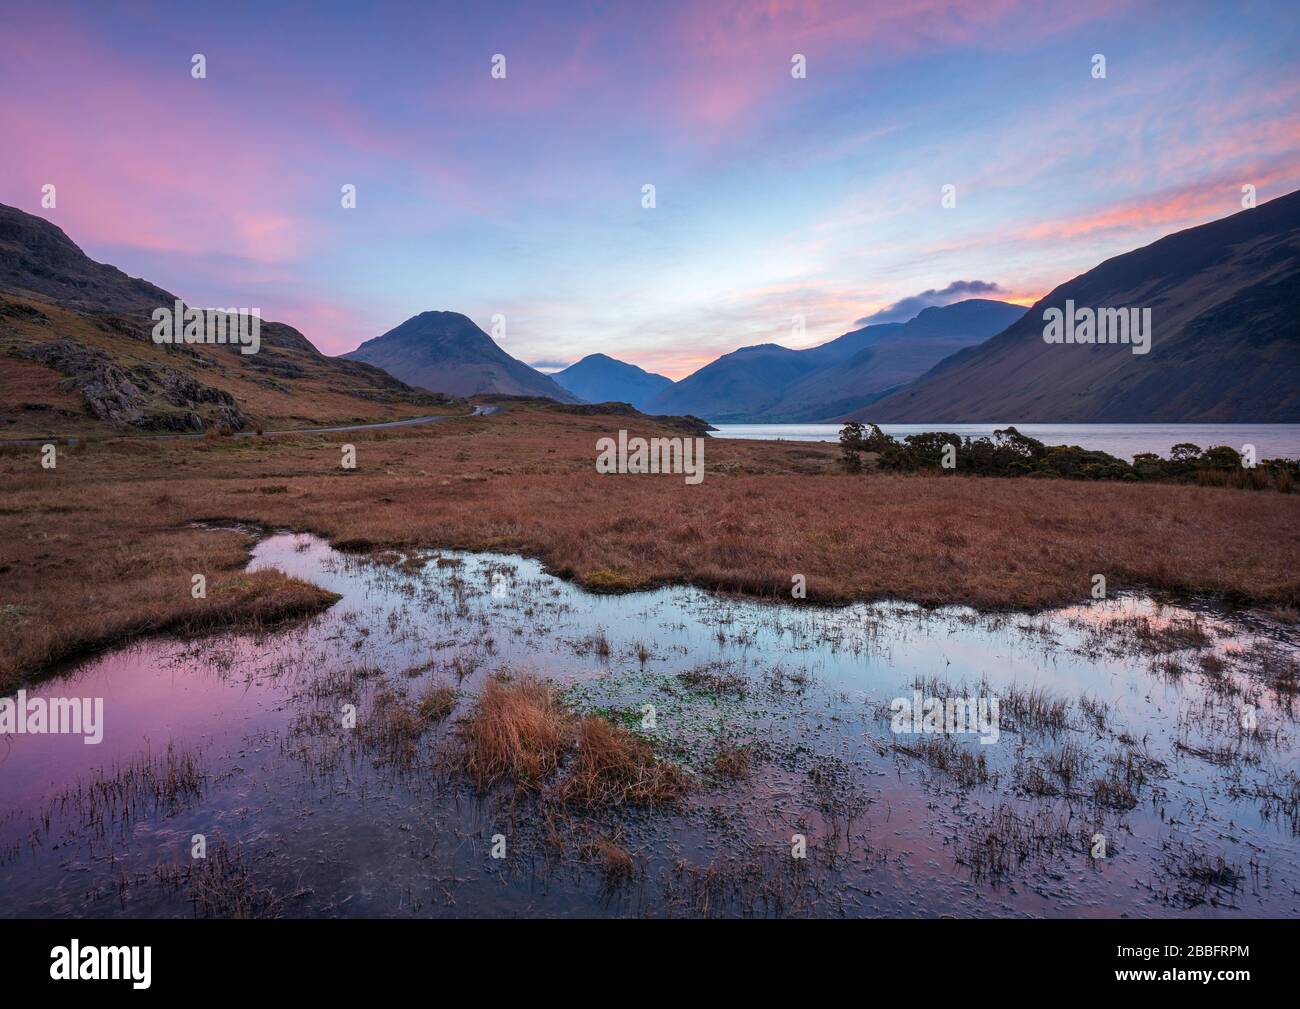 A beautiful pastel sunrise provides a backdrop for the dramatic high fells of the English Lake District at the top of Wast Water, Wasdale. Stock Photo